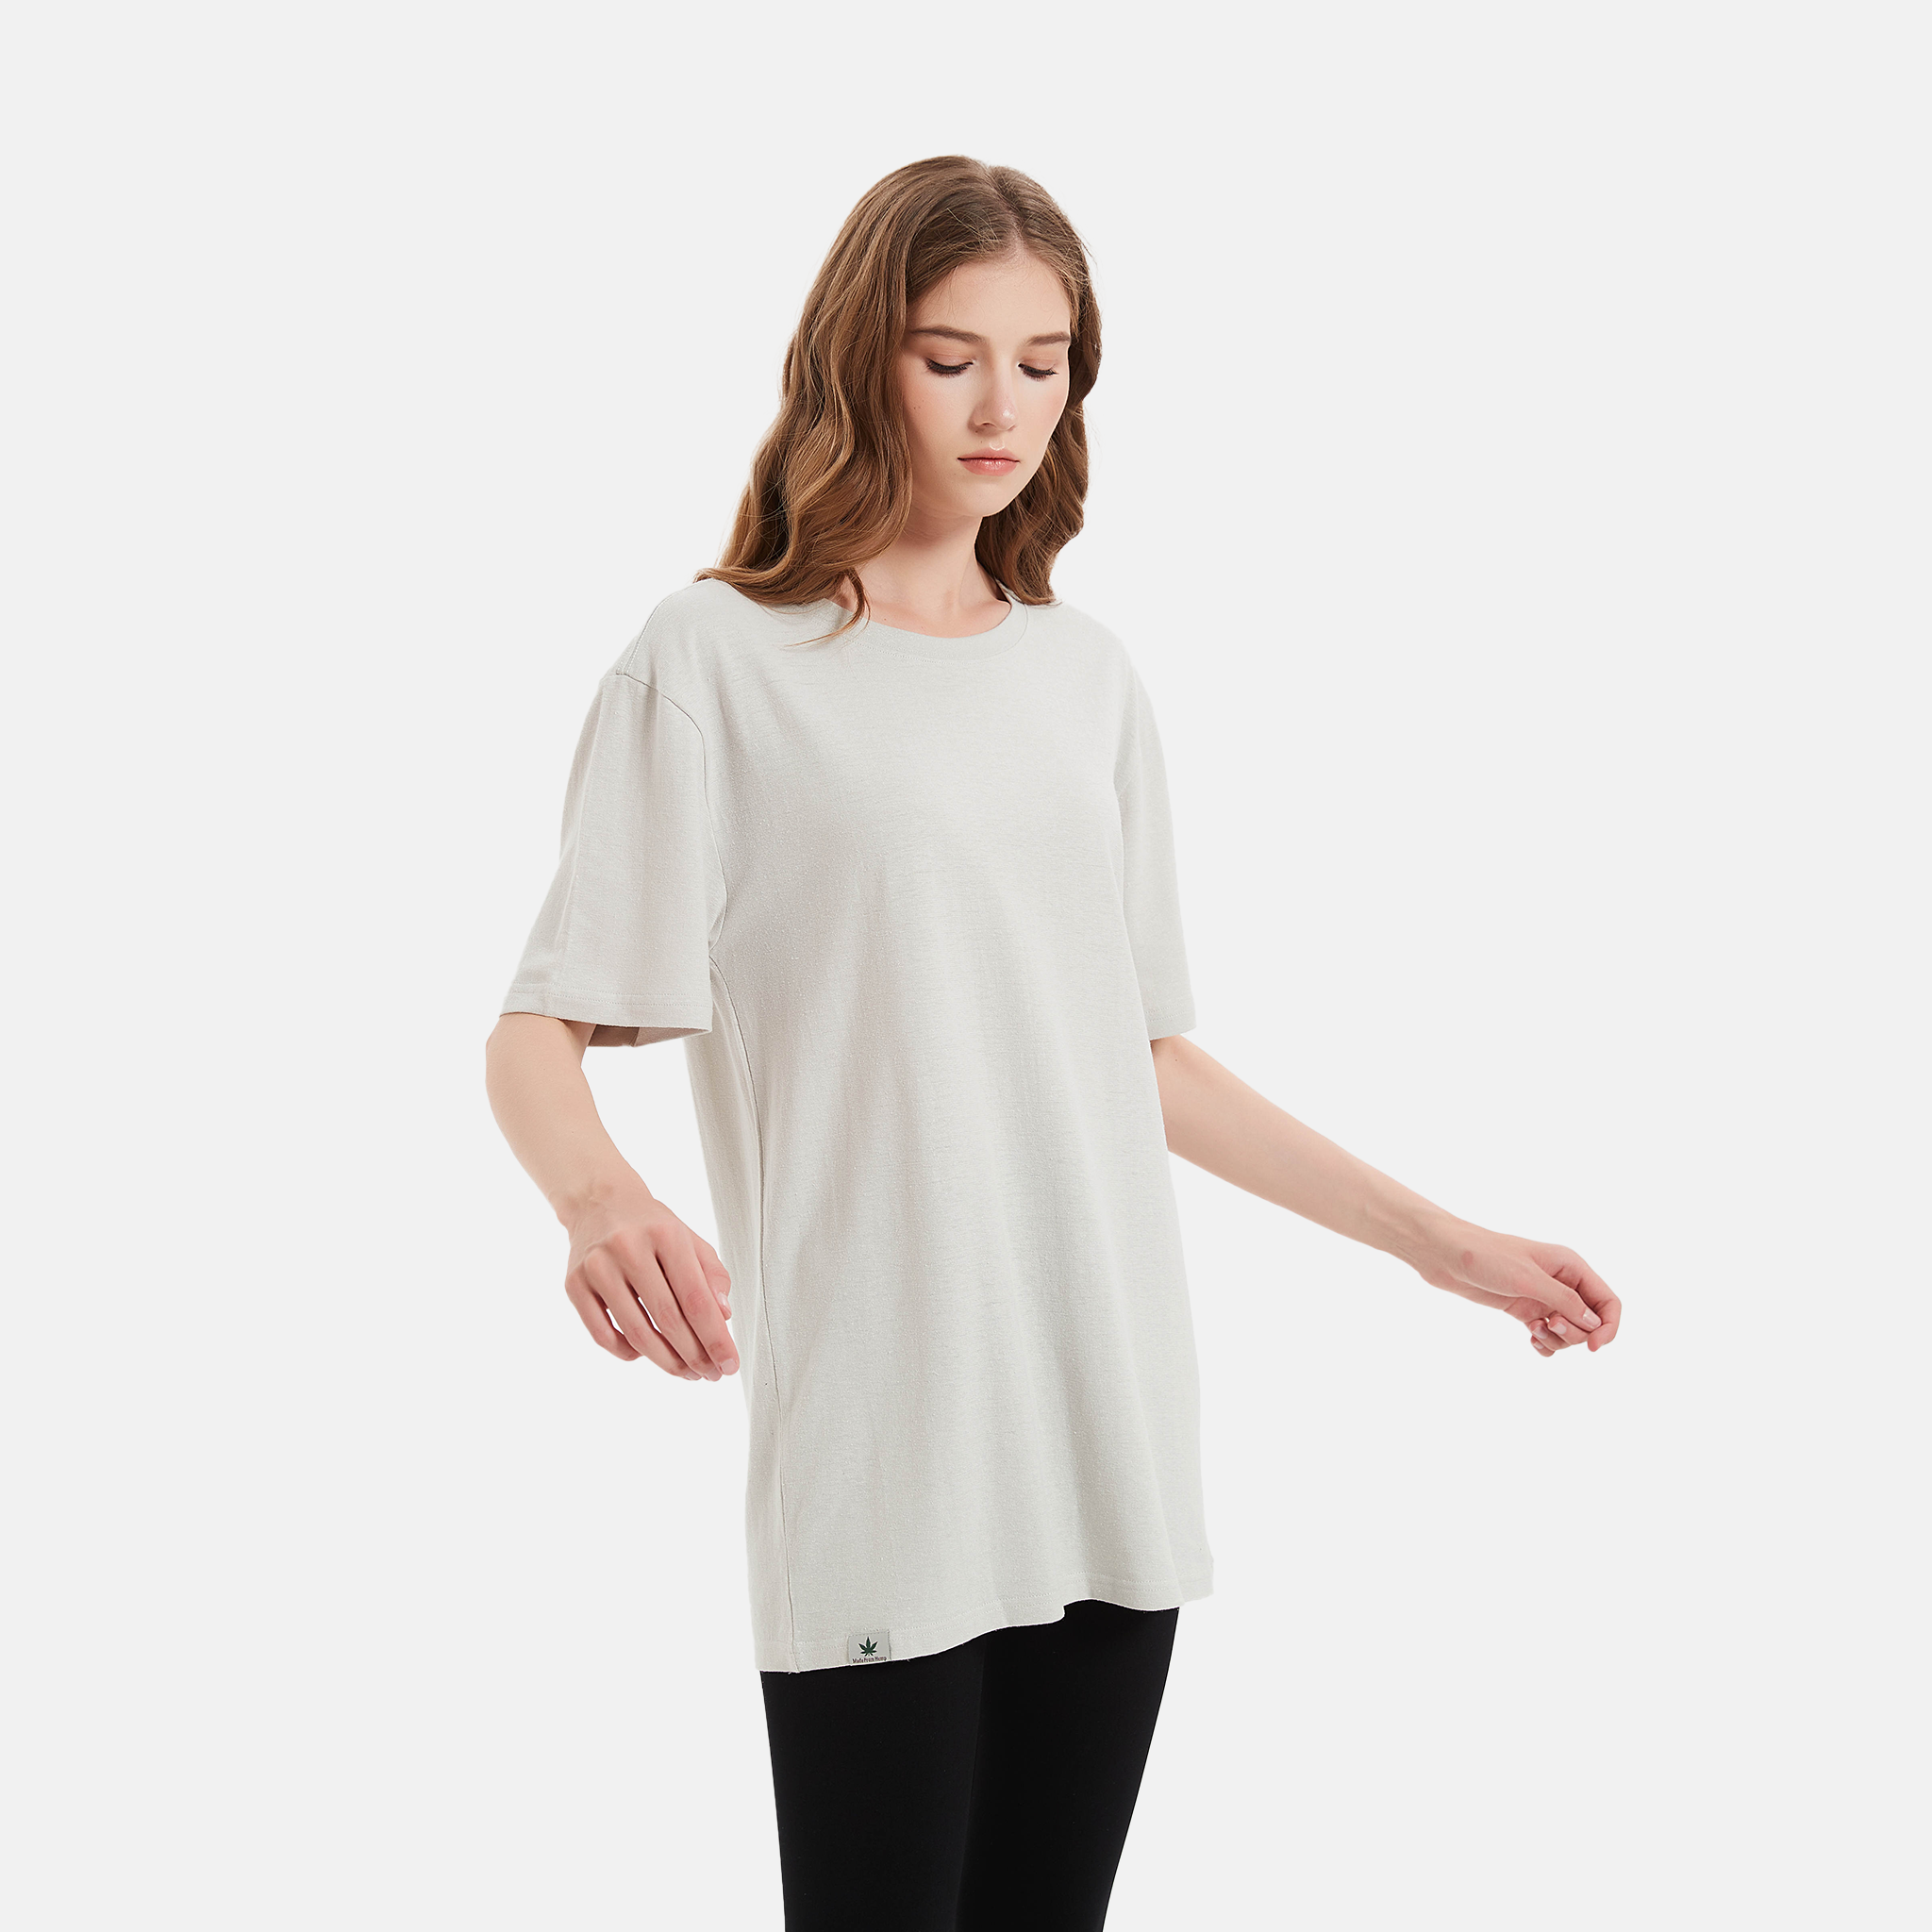 Eco-friendly gray t-shirt made with sustainable materials, Unisex